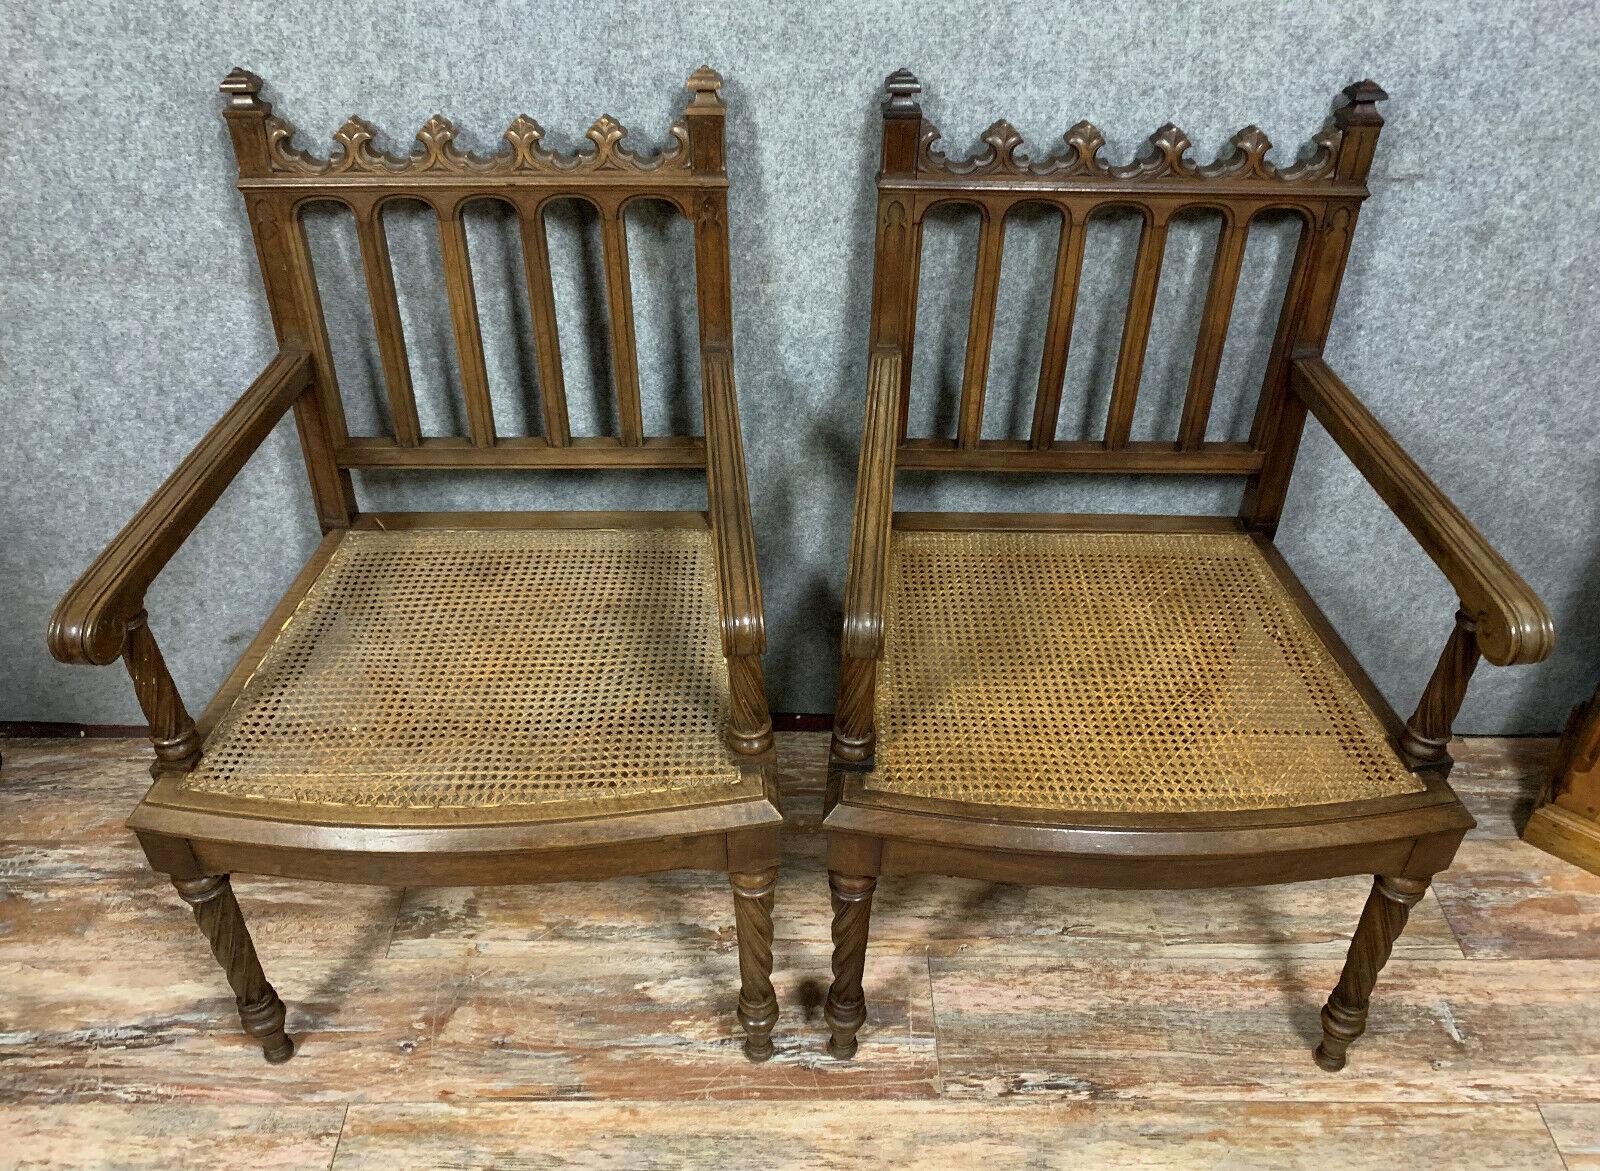 Elevate your interior decor with this exquisite pair of Gothic walnut armchairs, crafted around 1850. Inspired by the architectural elements of the medieval period, these stunning armchairs showcase timeless craftsmanship and intricate